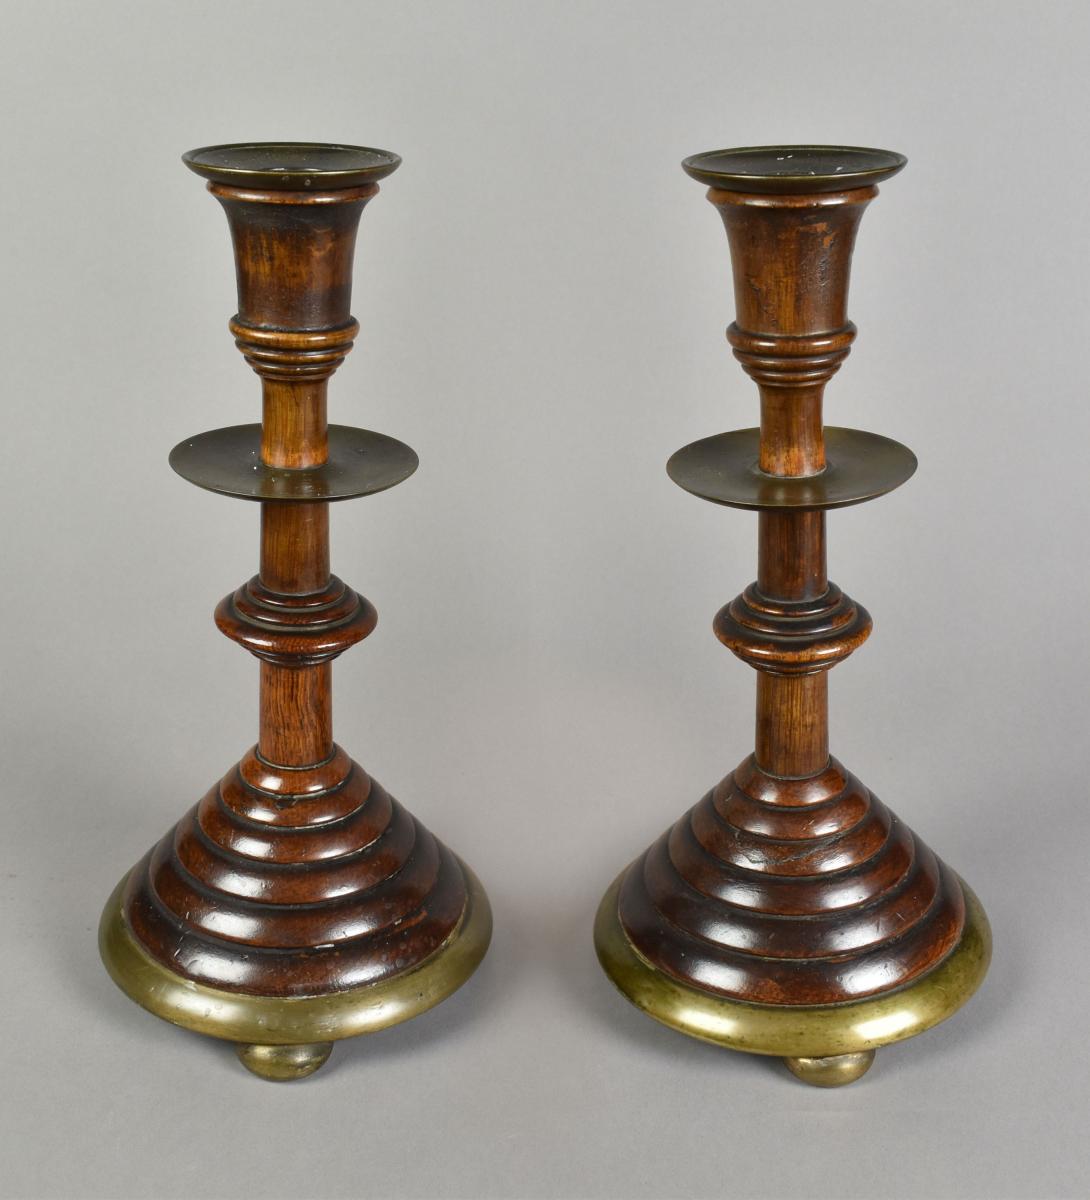 Pair of unusual oak and bell metal candlesticks reconstituted from York Minster after the fire of 1840, c.1845